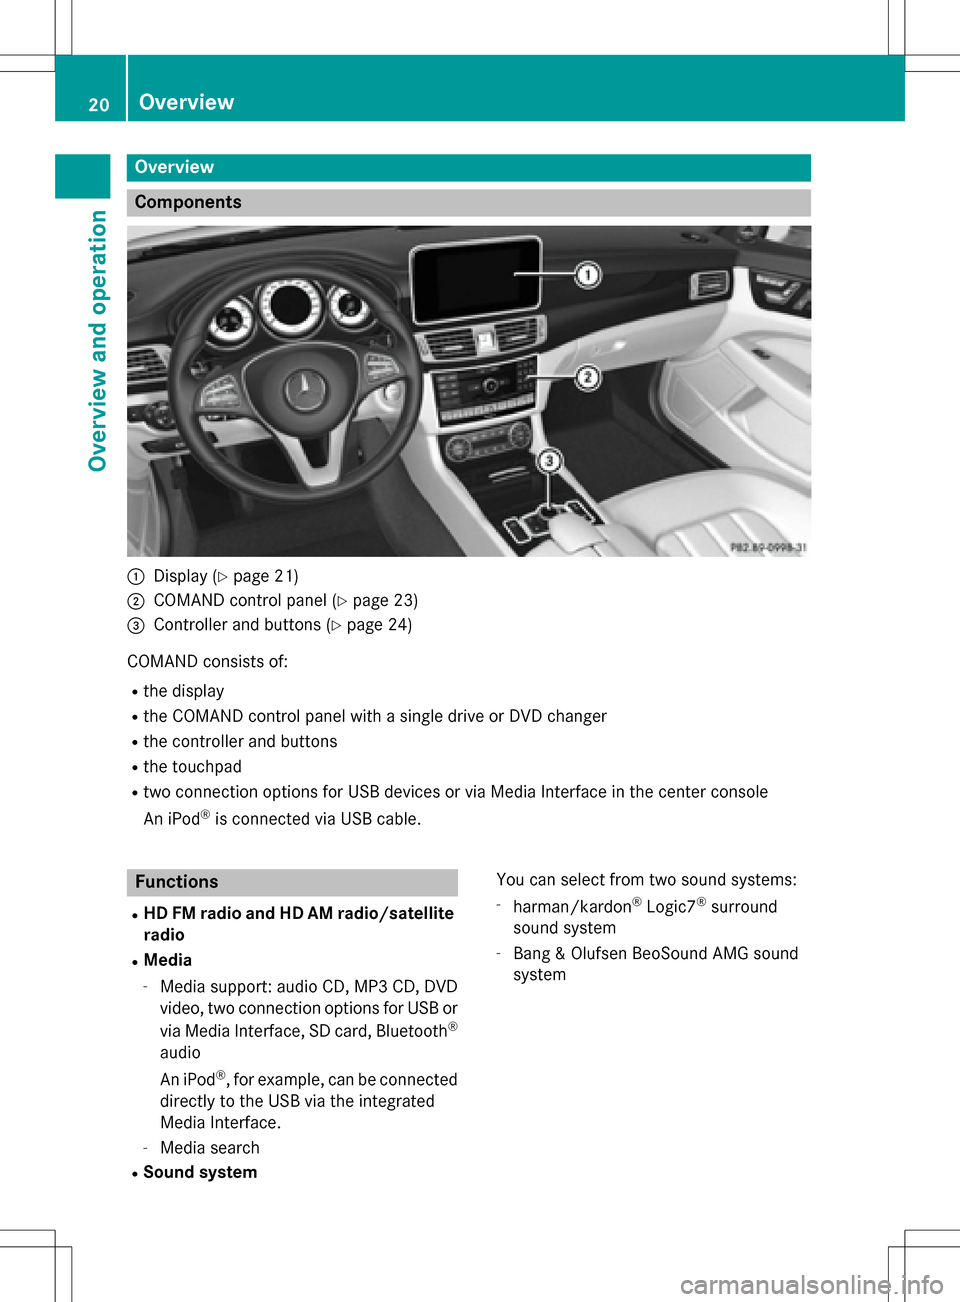 MERCEDES-BENZ GLA-Class 2016 X156 Comand Manual Overview
Components
:Display (Ypage 21)
;COMAND control panel (Ypage 23)
=Controller and buttons (Ypage 24)
COMAND consists of:
Rthe display
Rthe COMAND control panel with a single drive or DVD change